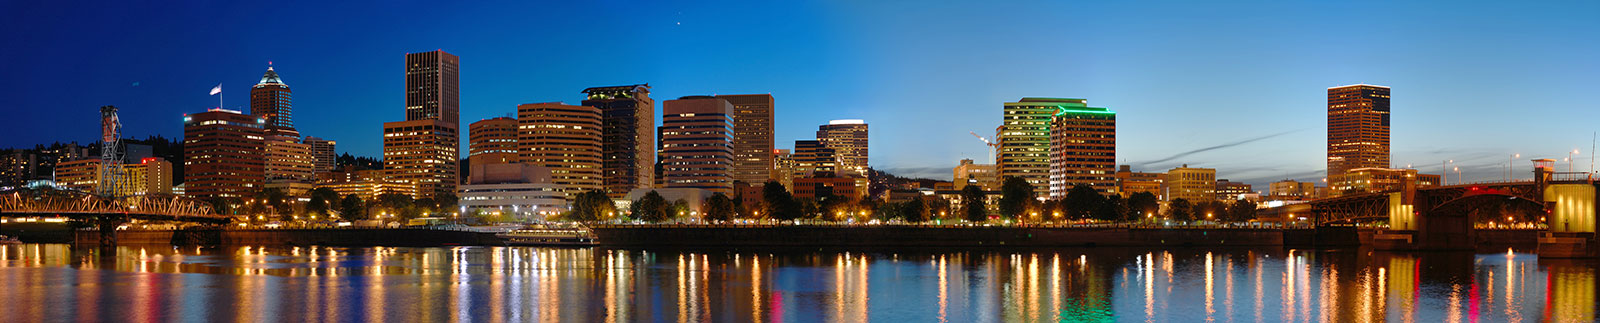 Certified Realty Company - Oregon Nightscape